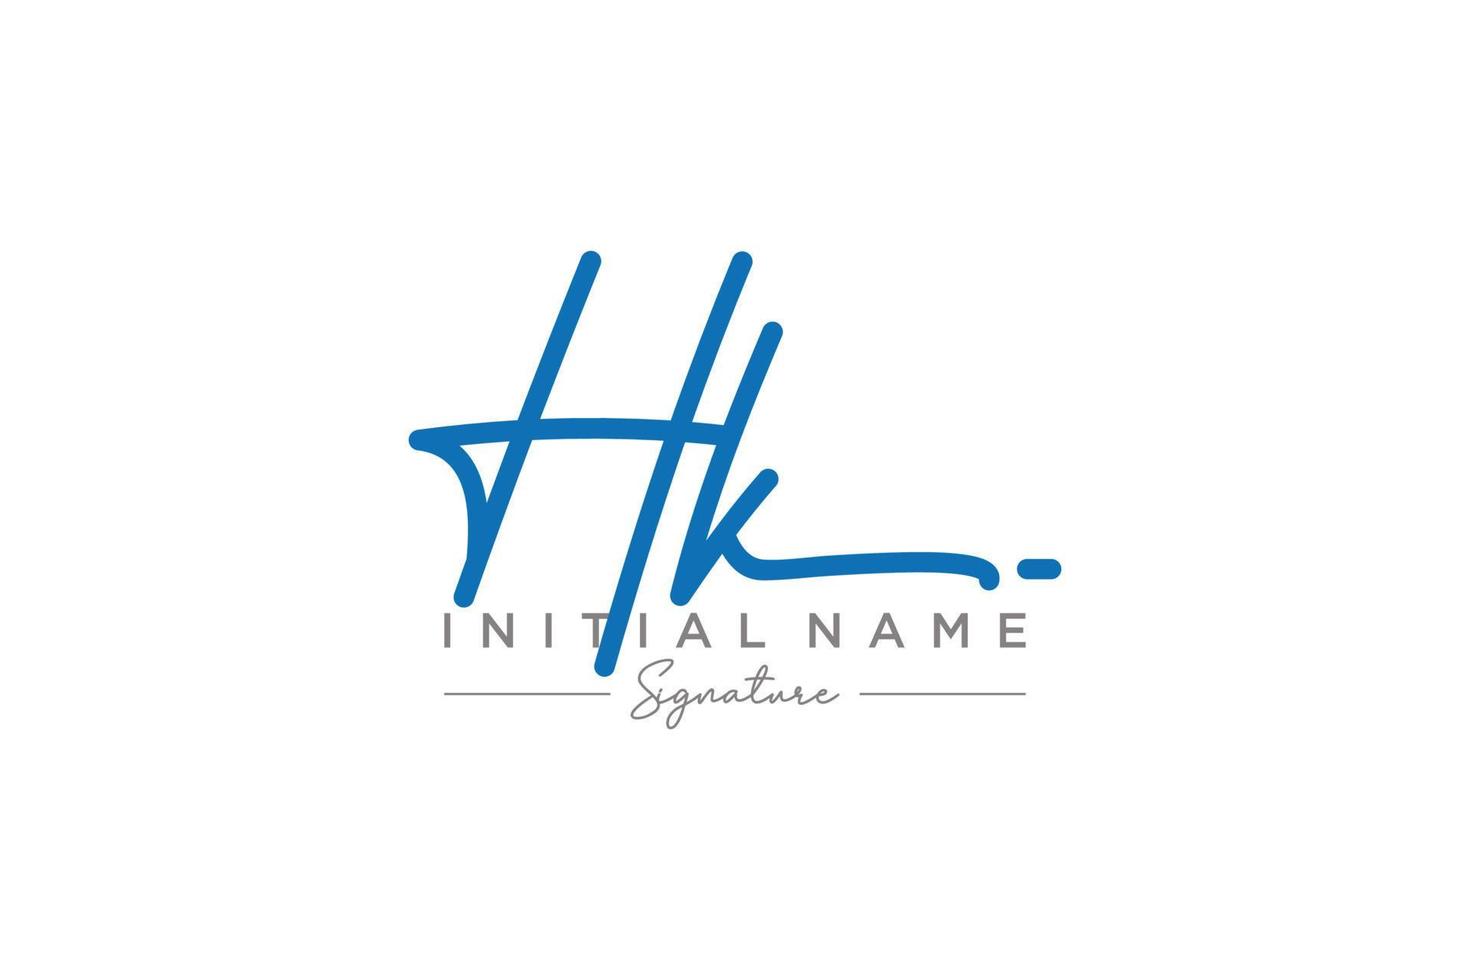 Initial HK signature logo template vector. Hand drawn Calligraphy lettering Vector illustration.